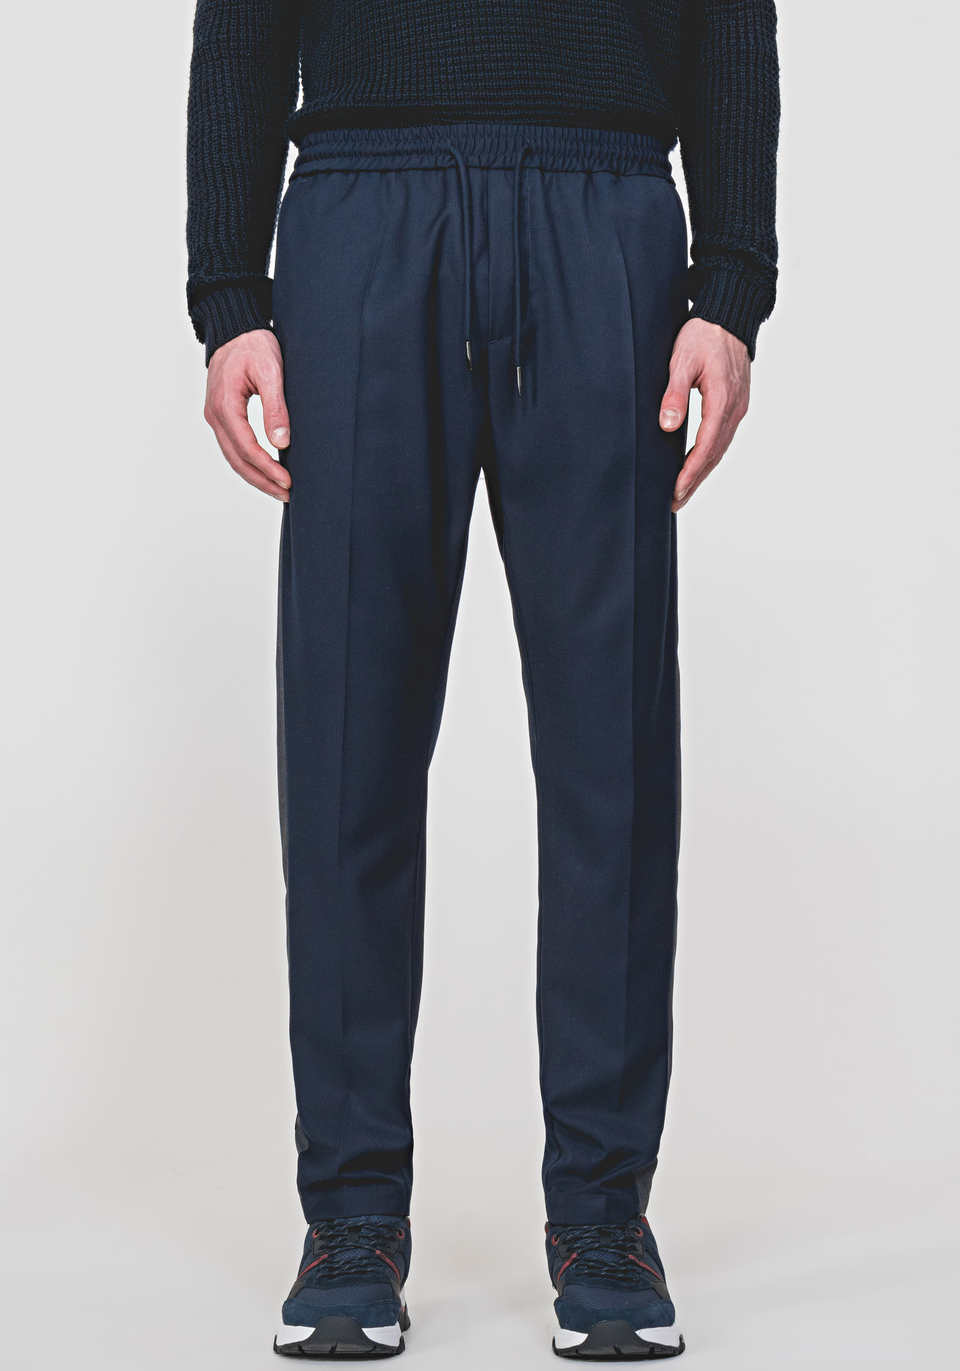 CARROT-FIT TROUSERS MADE OF SOFT-TOUCH BLENDED FABRIC WITH CONTRASTING SIDE BANDS - Antony Morato Online Shop